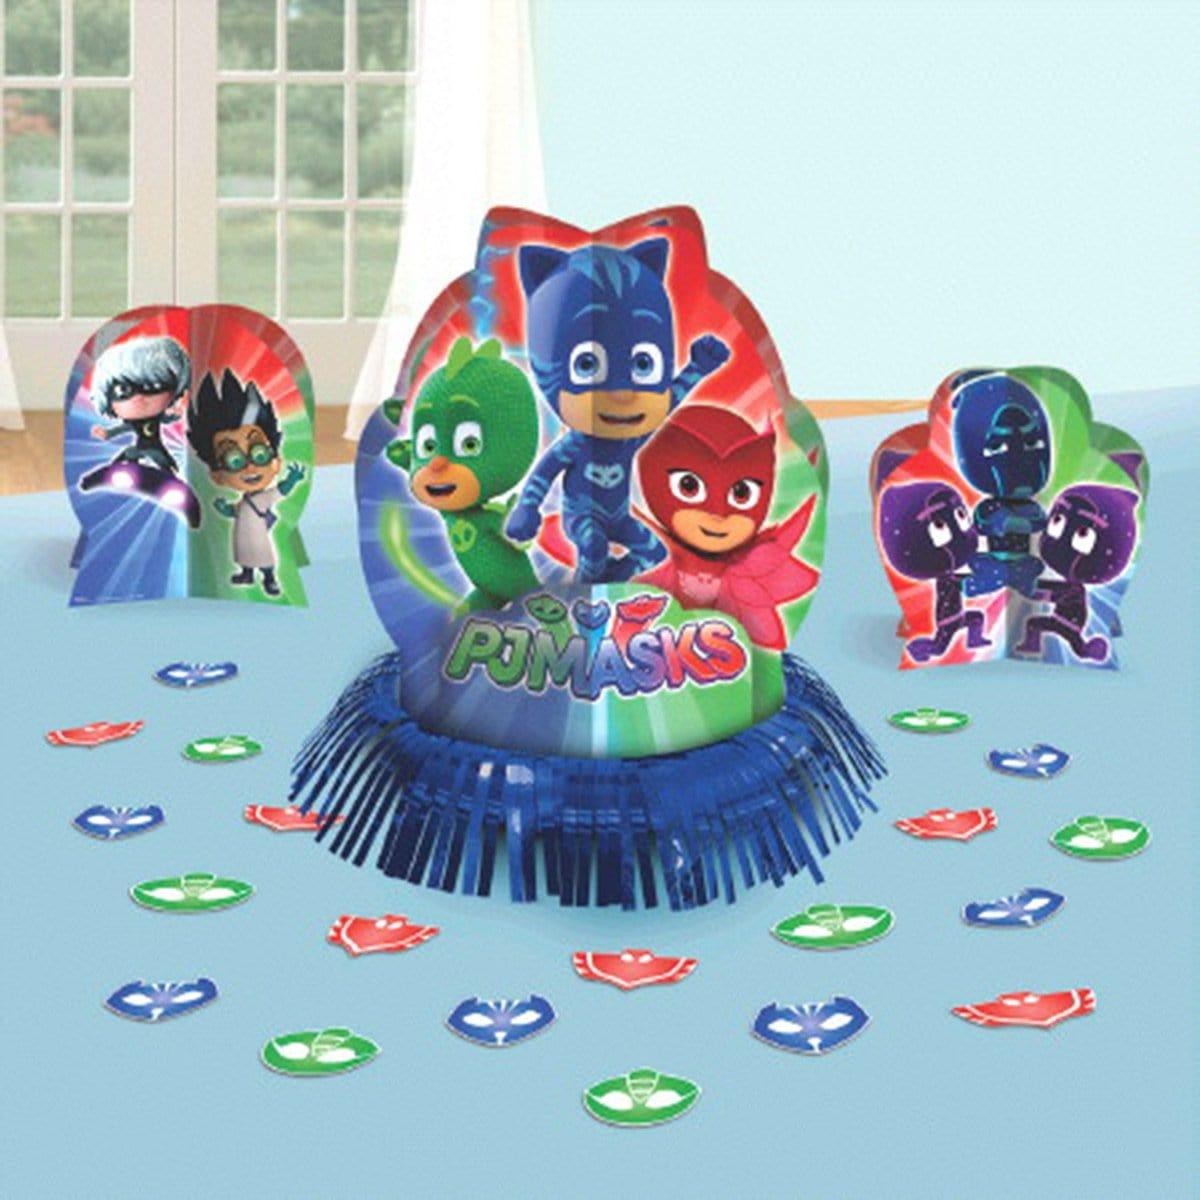 Buy Kids Birthday PJ Masks table decorating kit sold at Party Expert